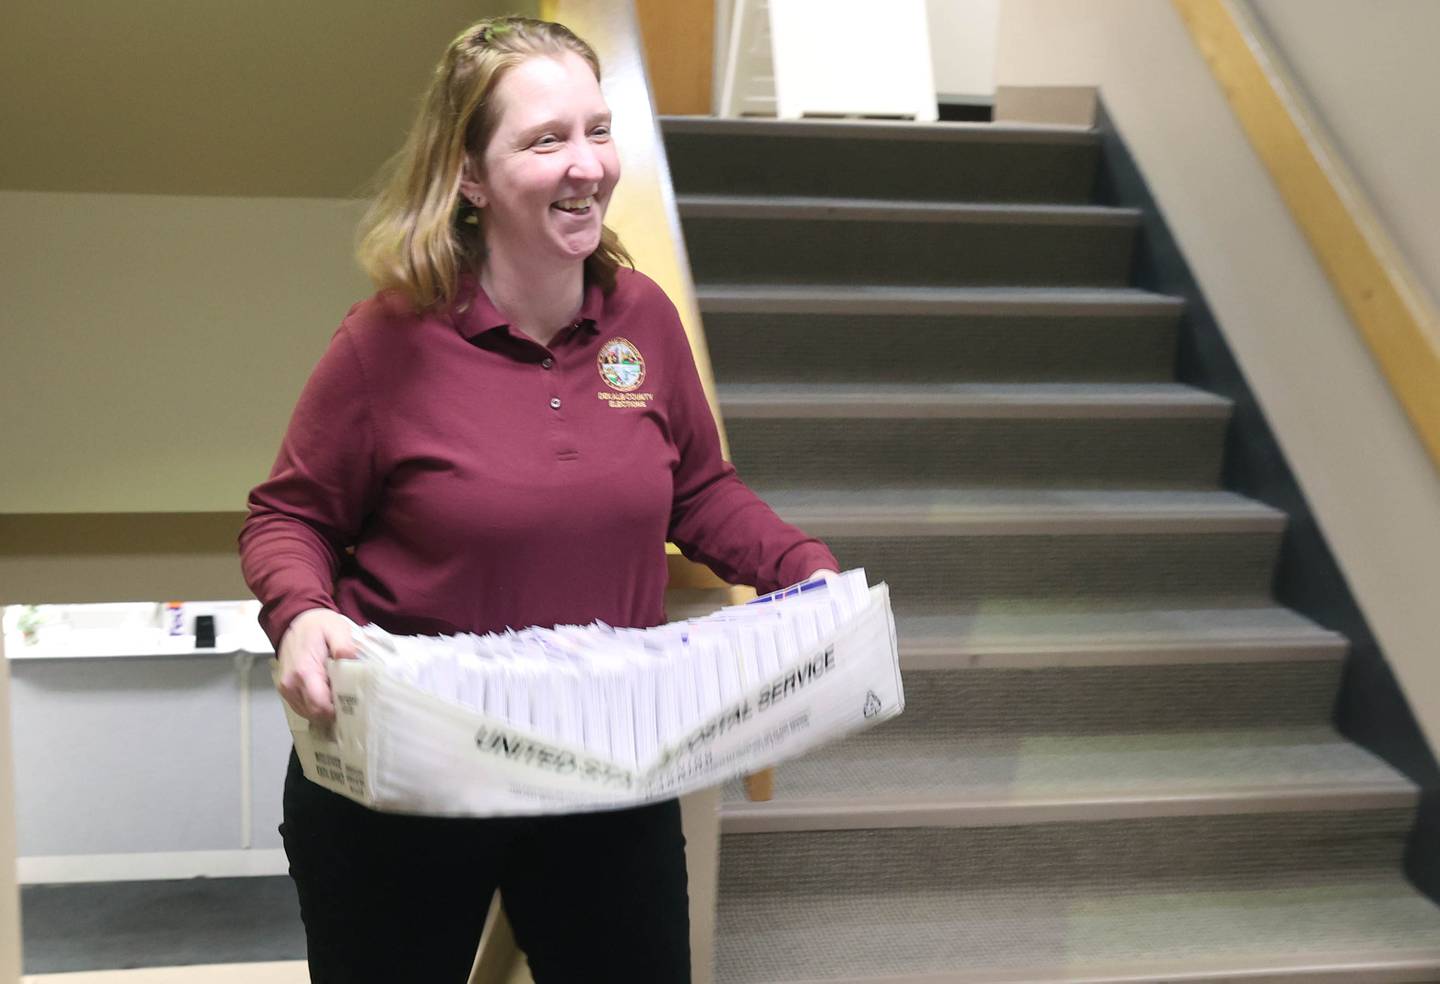 Jessica Rugerio, chief deputy of elections, brings up more vote-by-mail ballots to be put into envelopes Wednesday, Feb. 22, 2023, in the DeKalb County Administration Building in Sycamore.